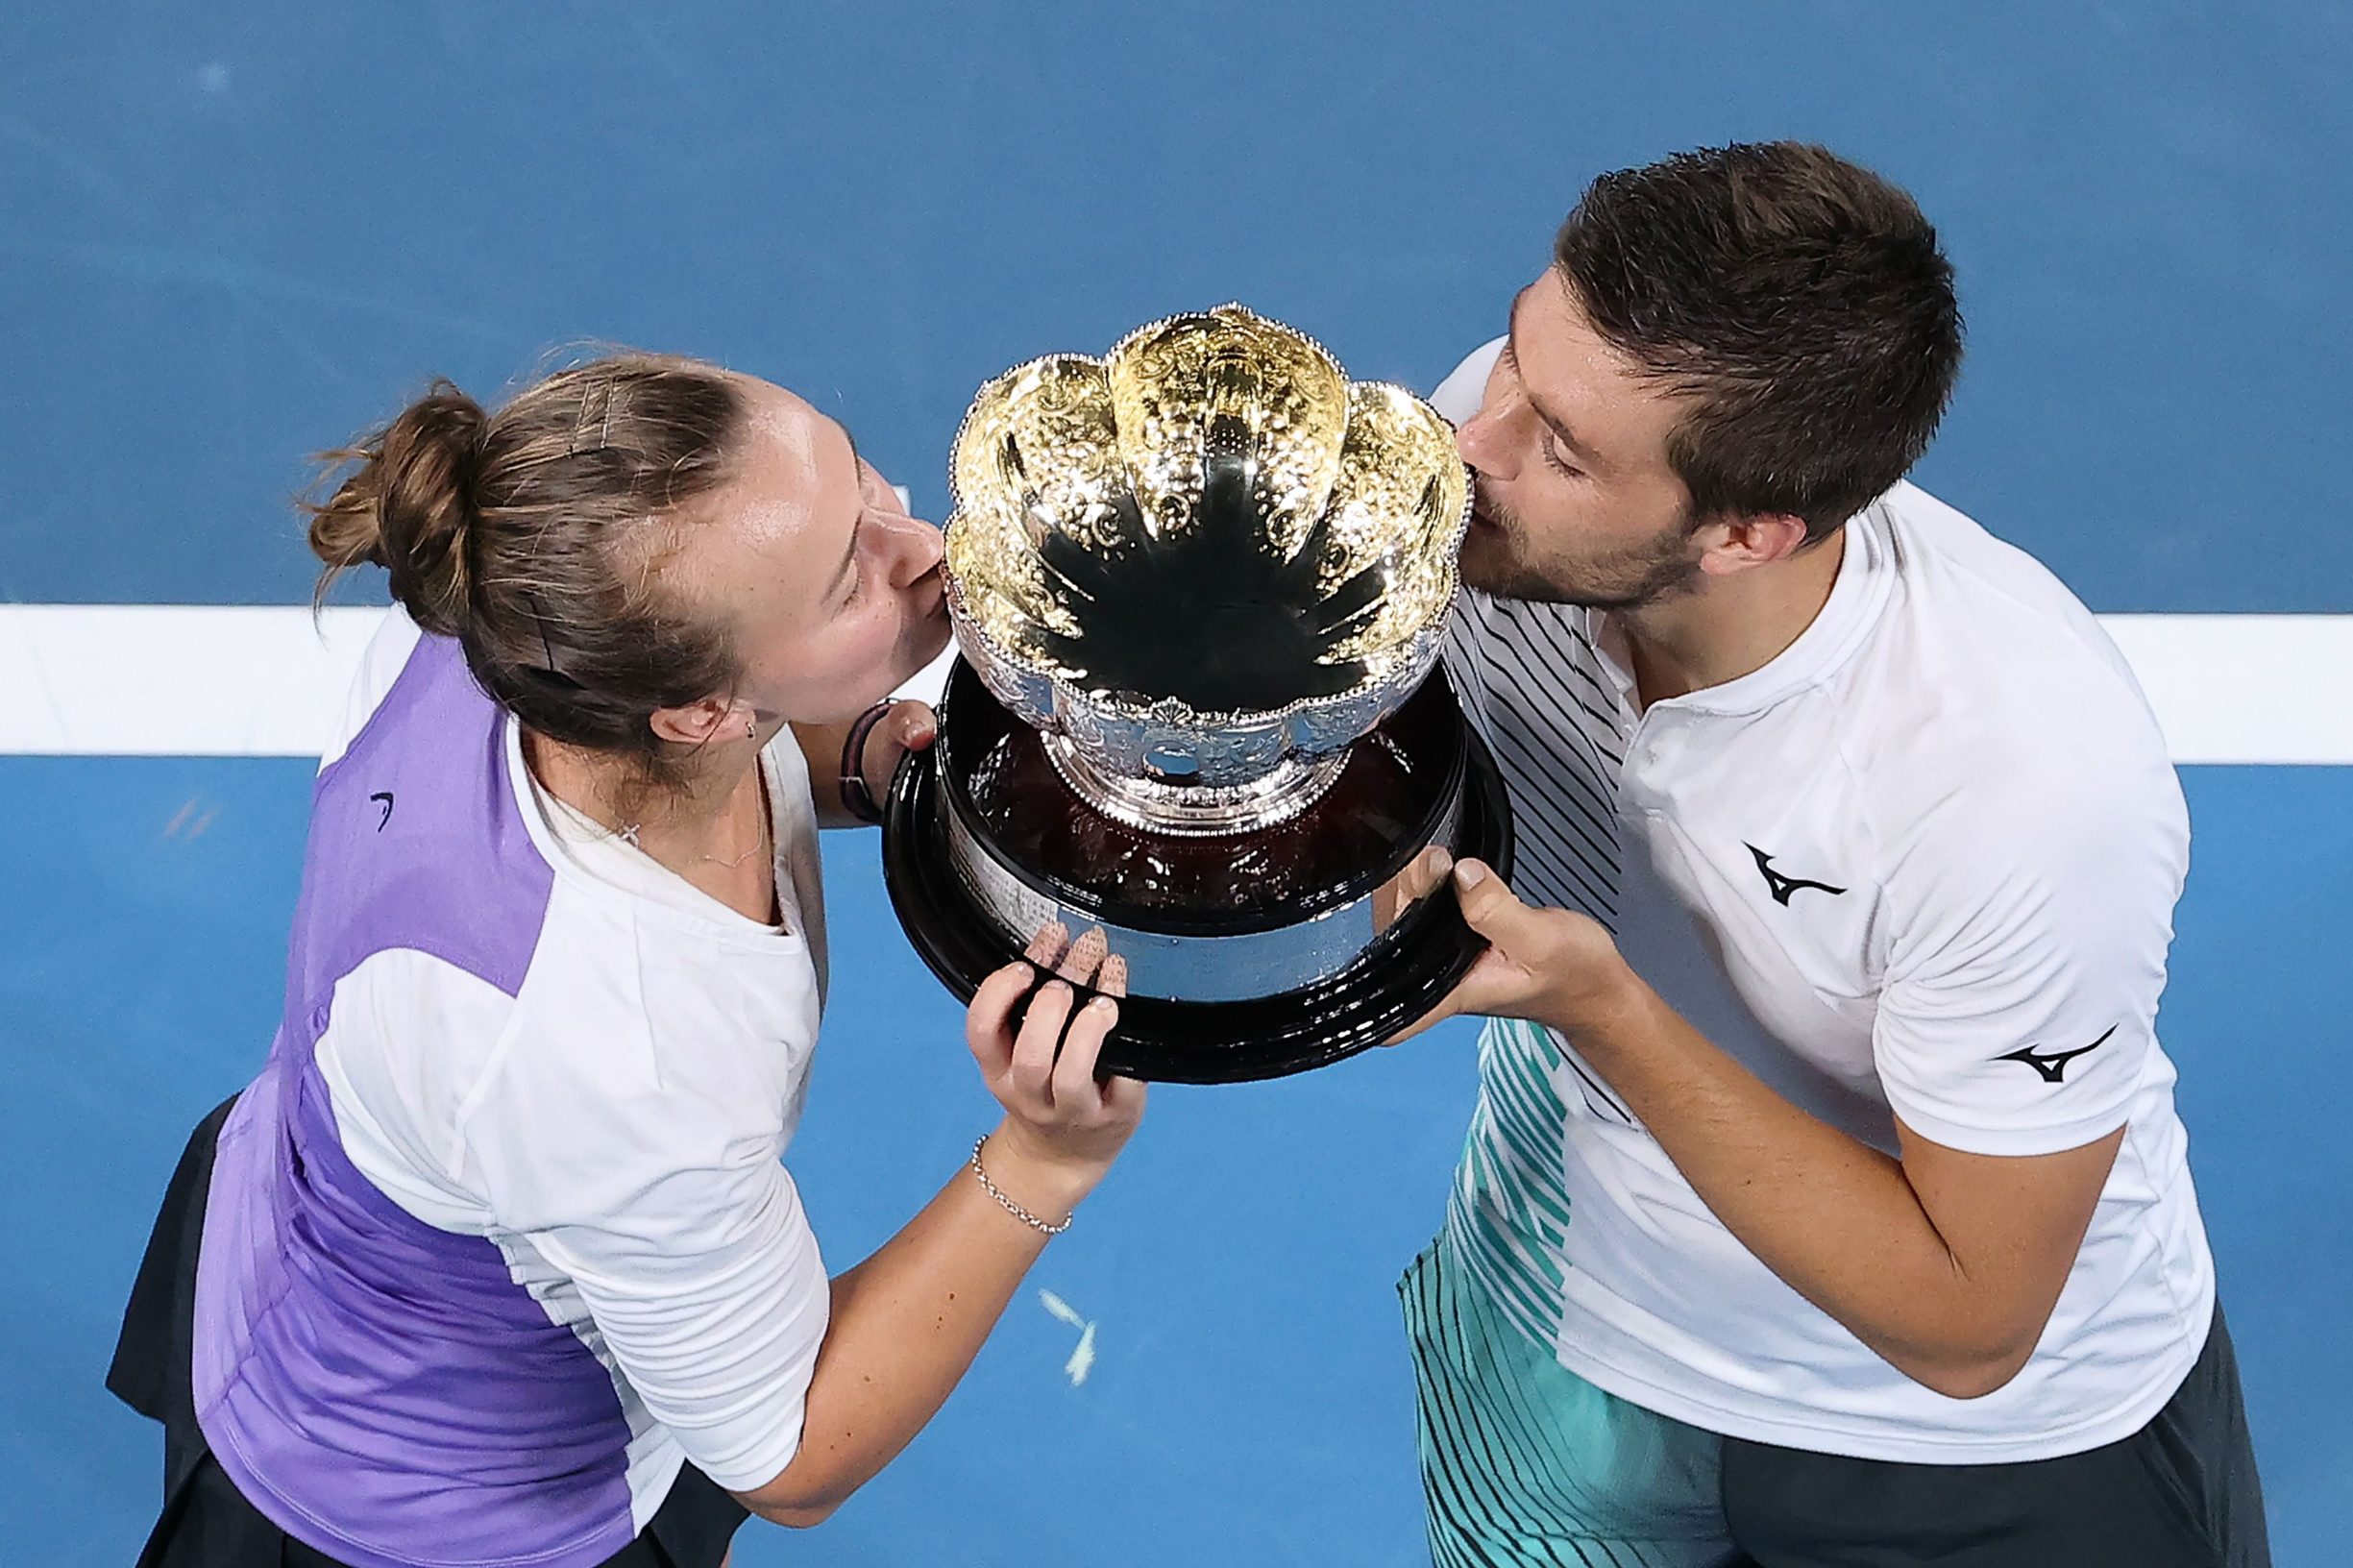 Croatia's Nikola Mektic (R) and Czech Republic's Barbora Krejcikova kiss the trophy after winning against Britain's Jamie Murray and Bethanie Mattek-Sands of the US in their mixed doubles final match on day thirteen of the Australian Open tennis tournament in Melbourne on February 1, 2020. (Photo by DAVID GRAY / AFP) / IMAGE RESTRICTED TO EDITORIAL USE - STRICTLY NO COMMERCIAL USE